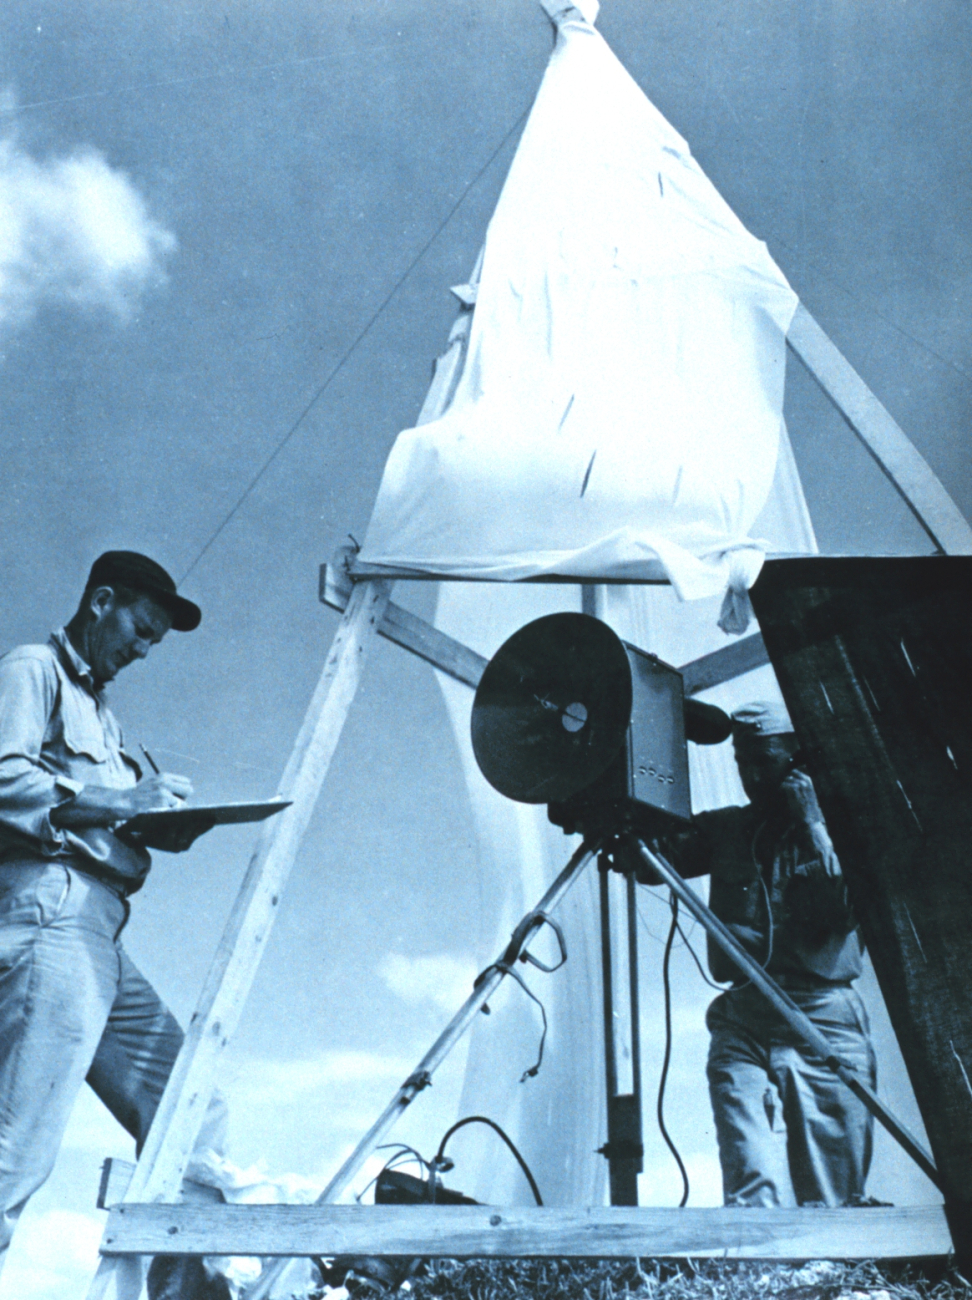 Charles Kearse, Chief Electronics Technician on the EXPLORER recordstellurometer distance measurements observed by Commander Ray Stone at SwanIsland in the Caribbean during C&GS; Ship EXPLORER expedition from West Coastbase to East Coast base in January - April 1960